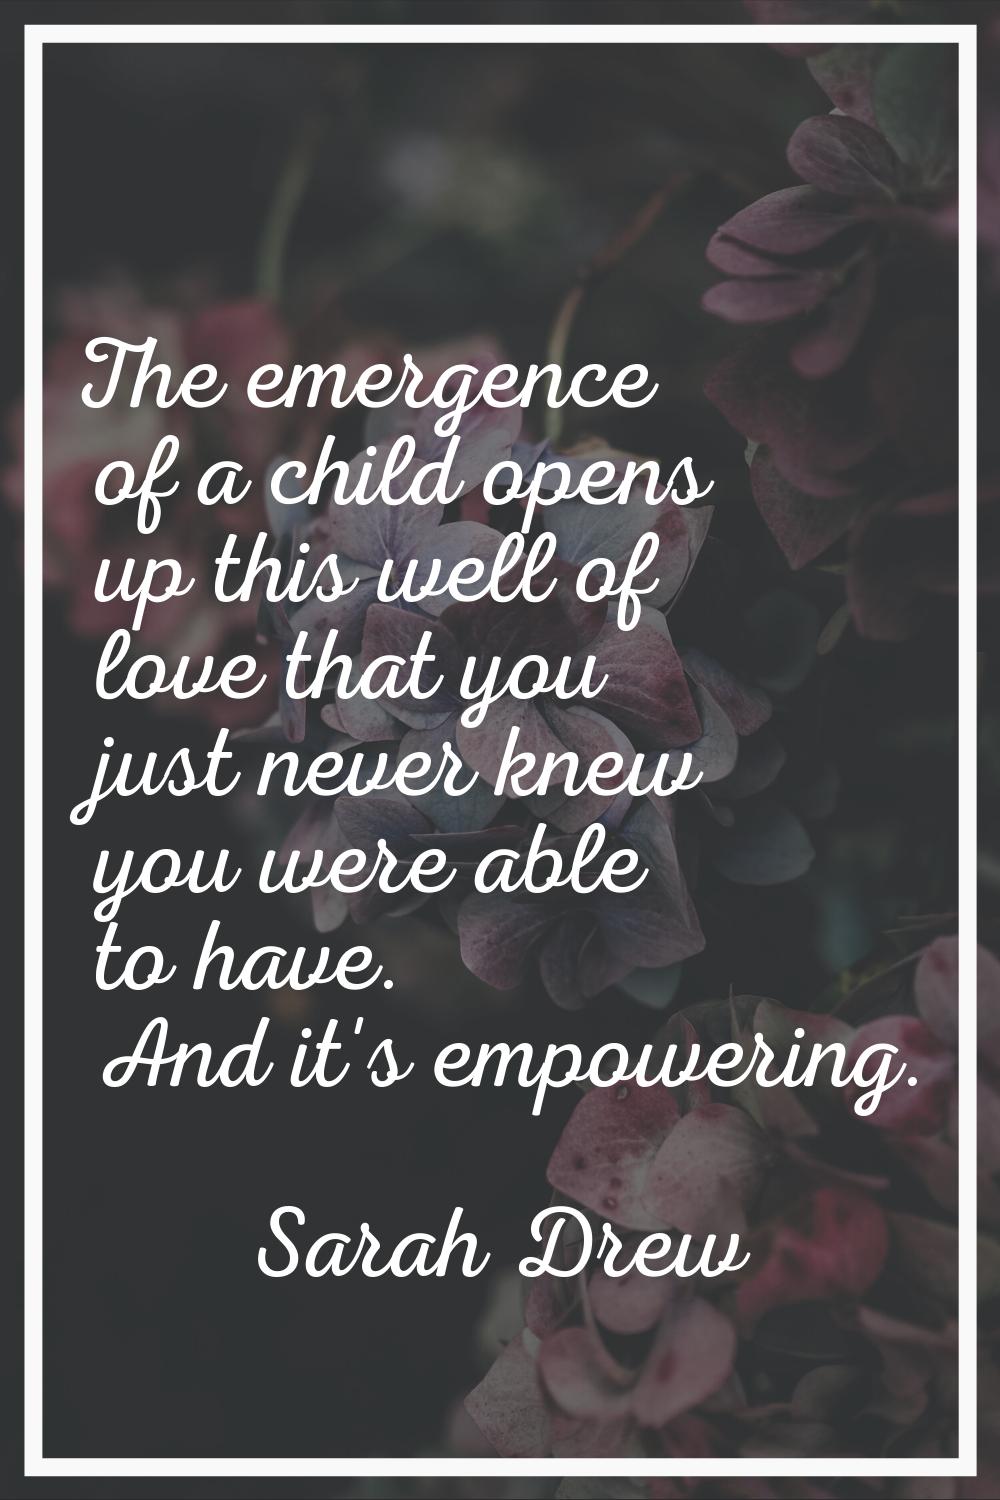 The emergence of a child opens up this well of love that you just never knew you were able to have.